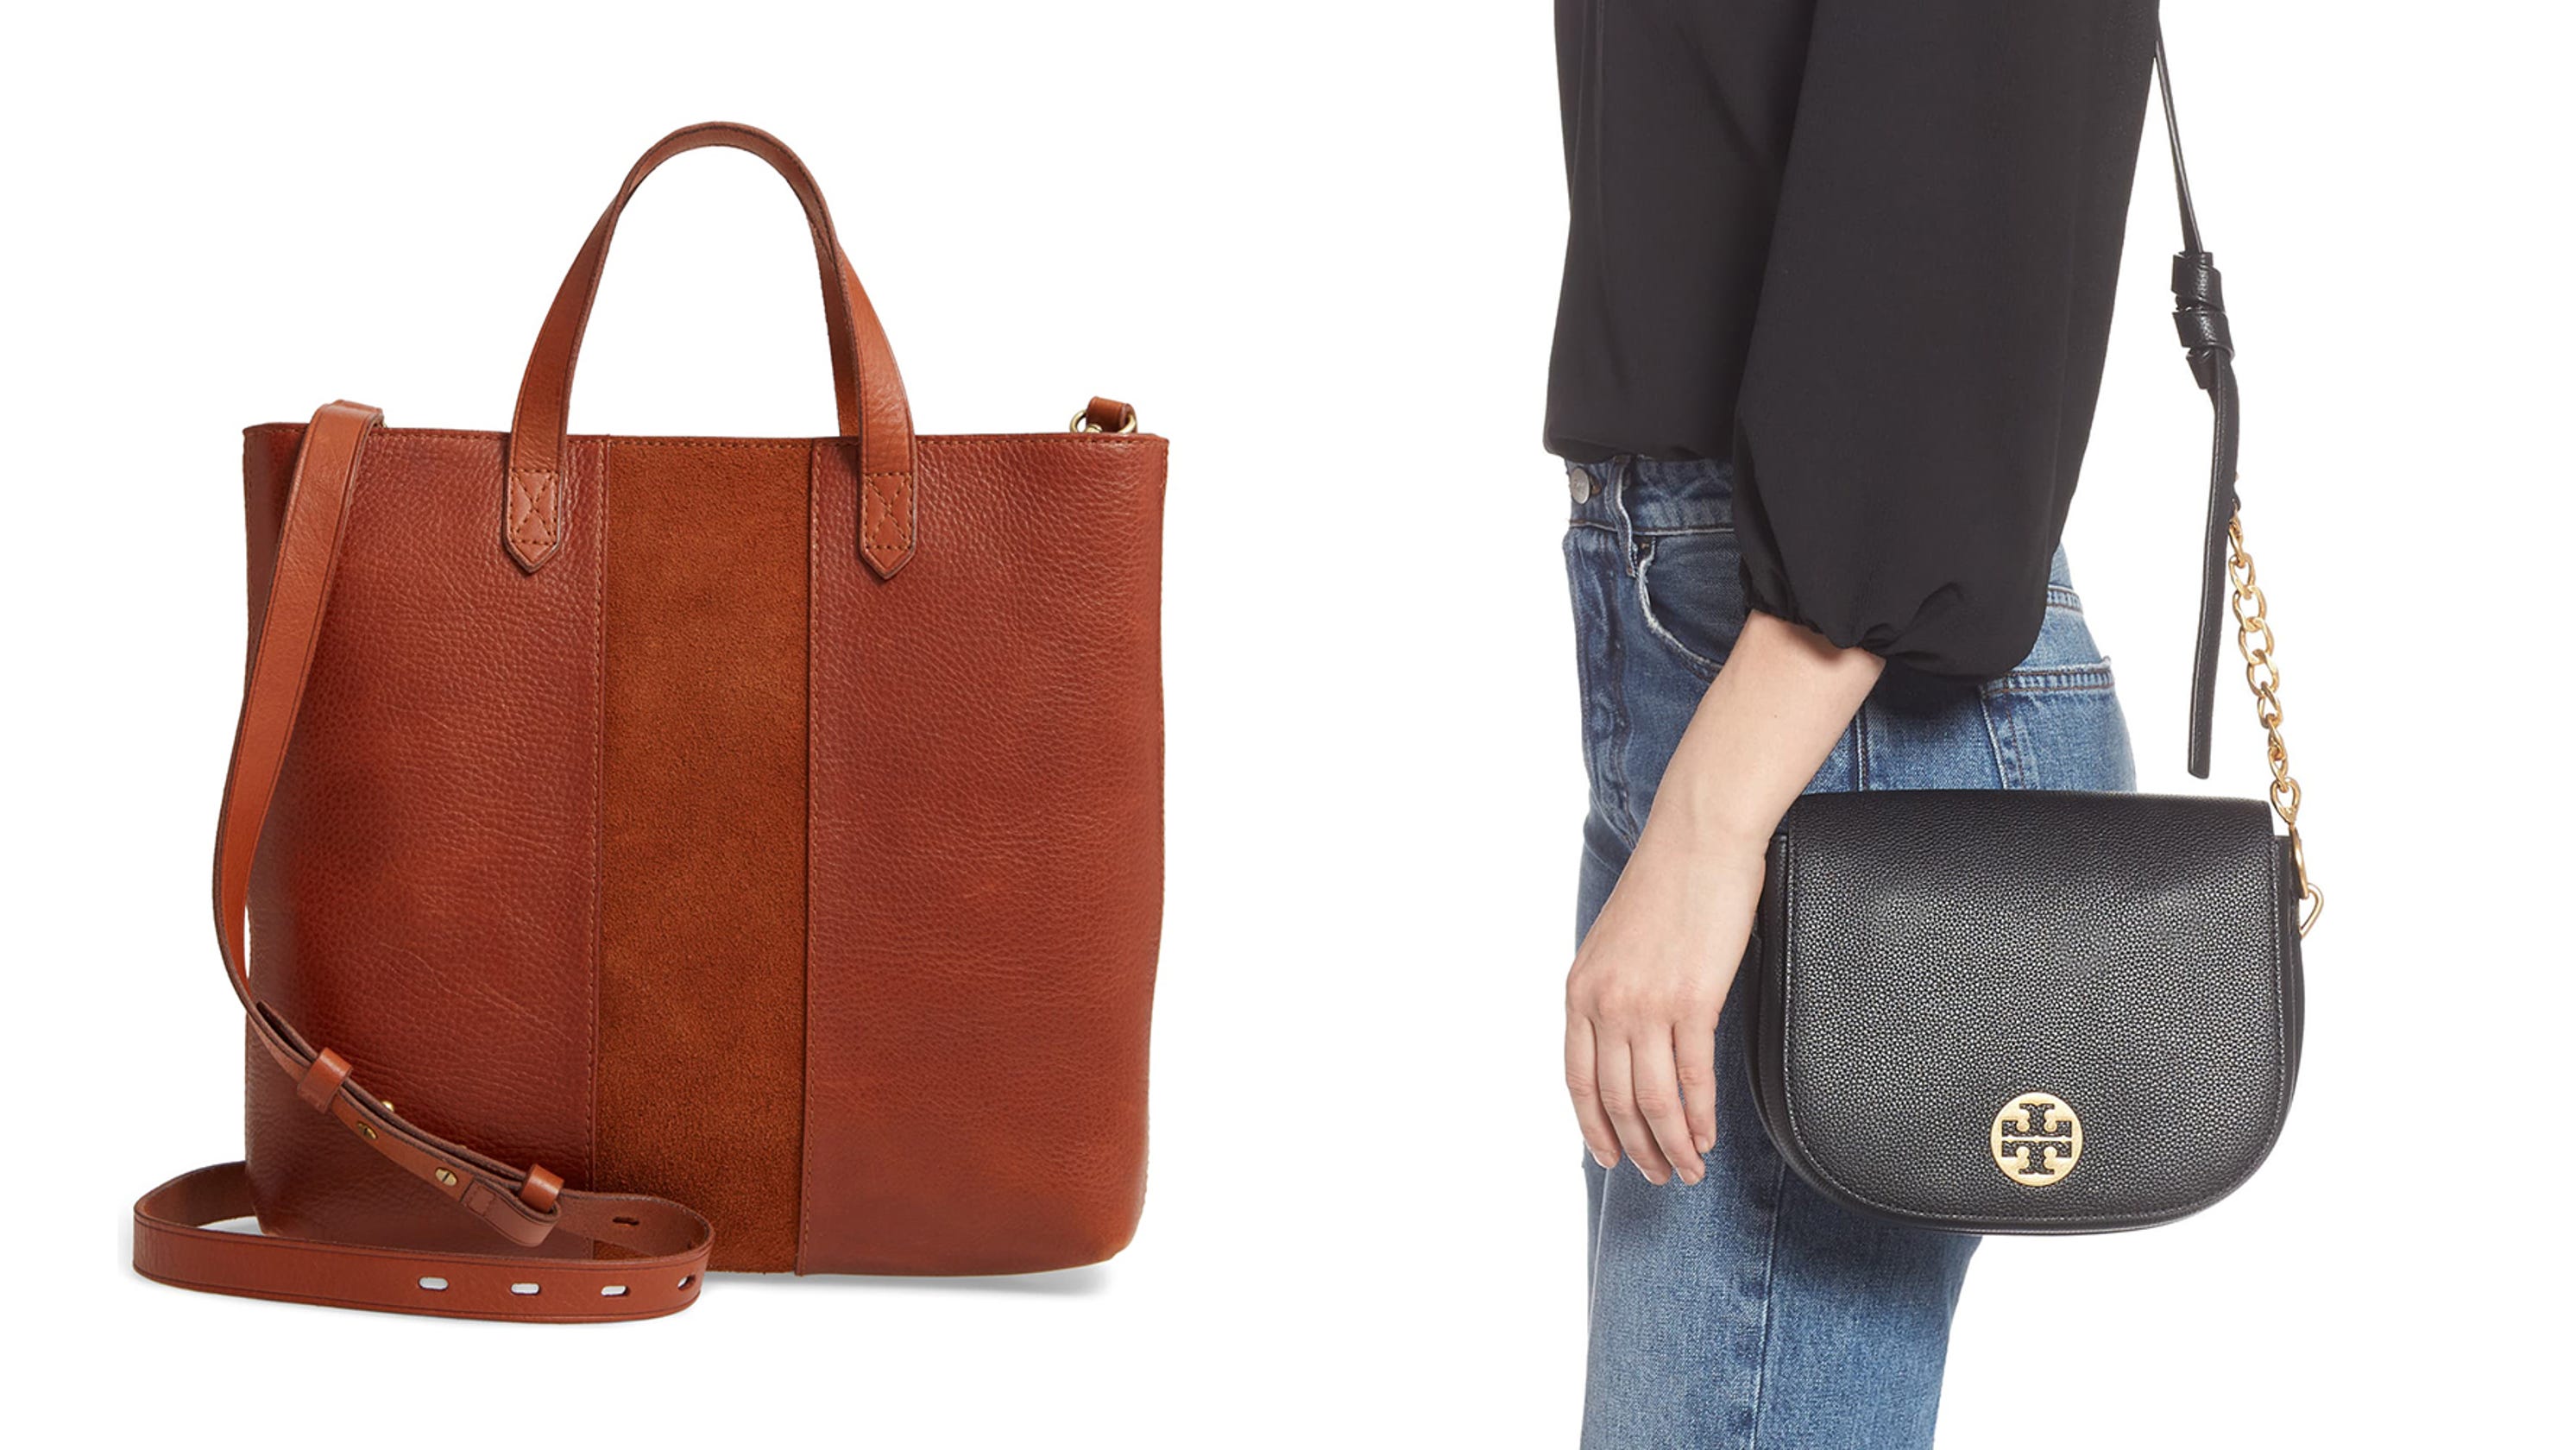 Nordstrom Anniversary Sale 2019: The best designer bags and accessories